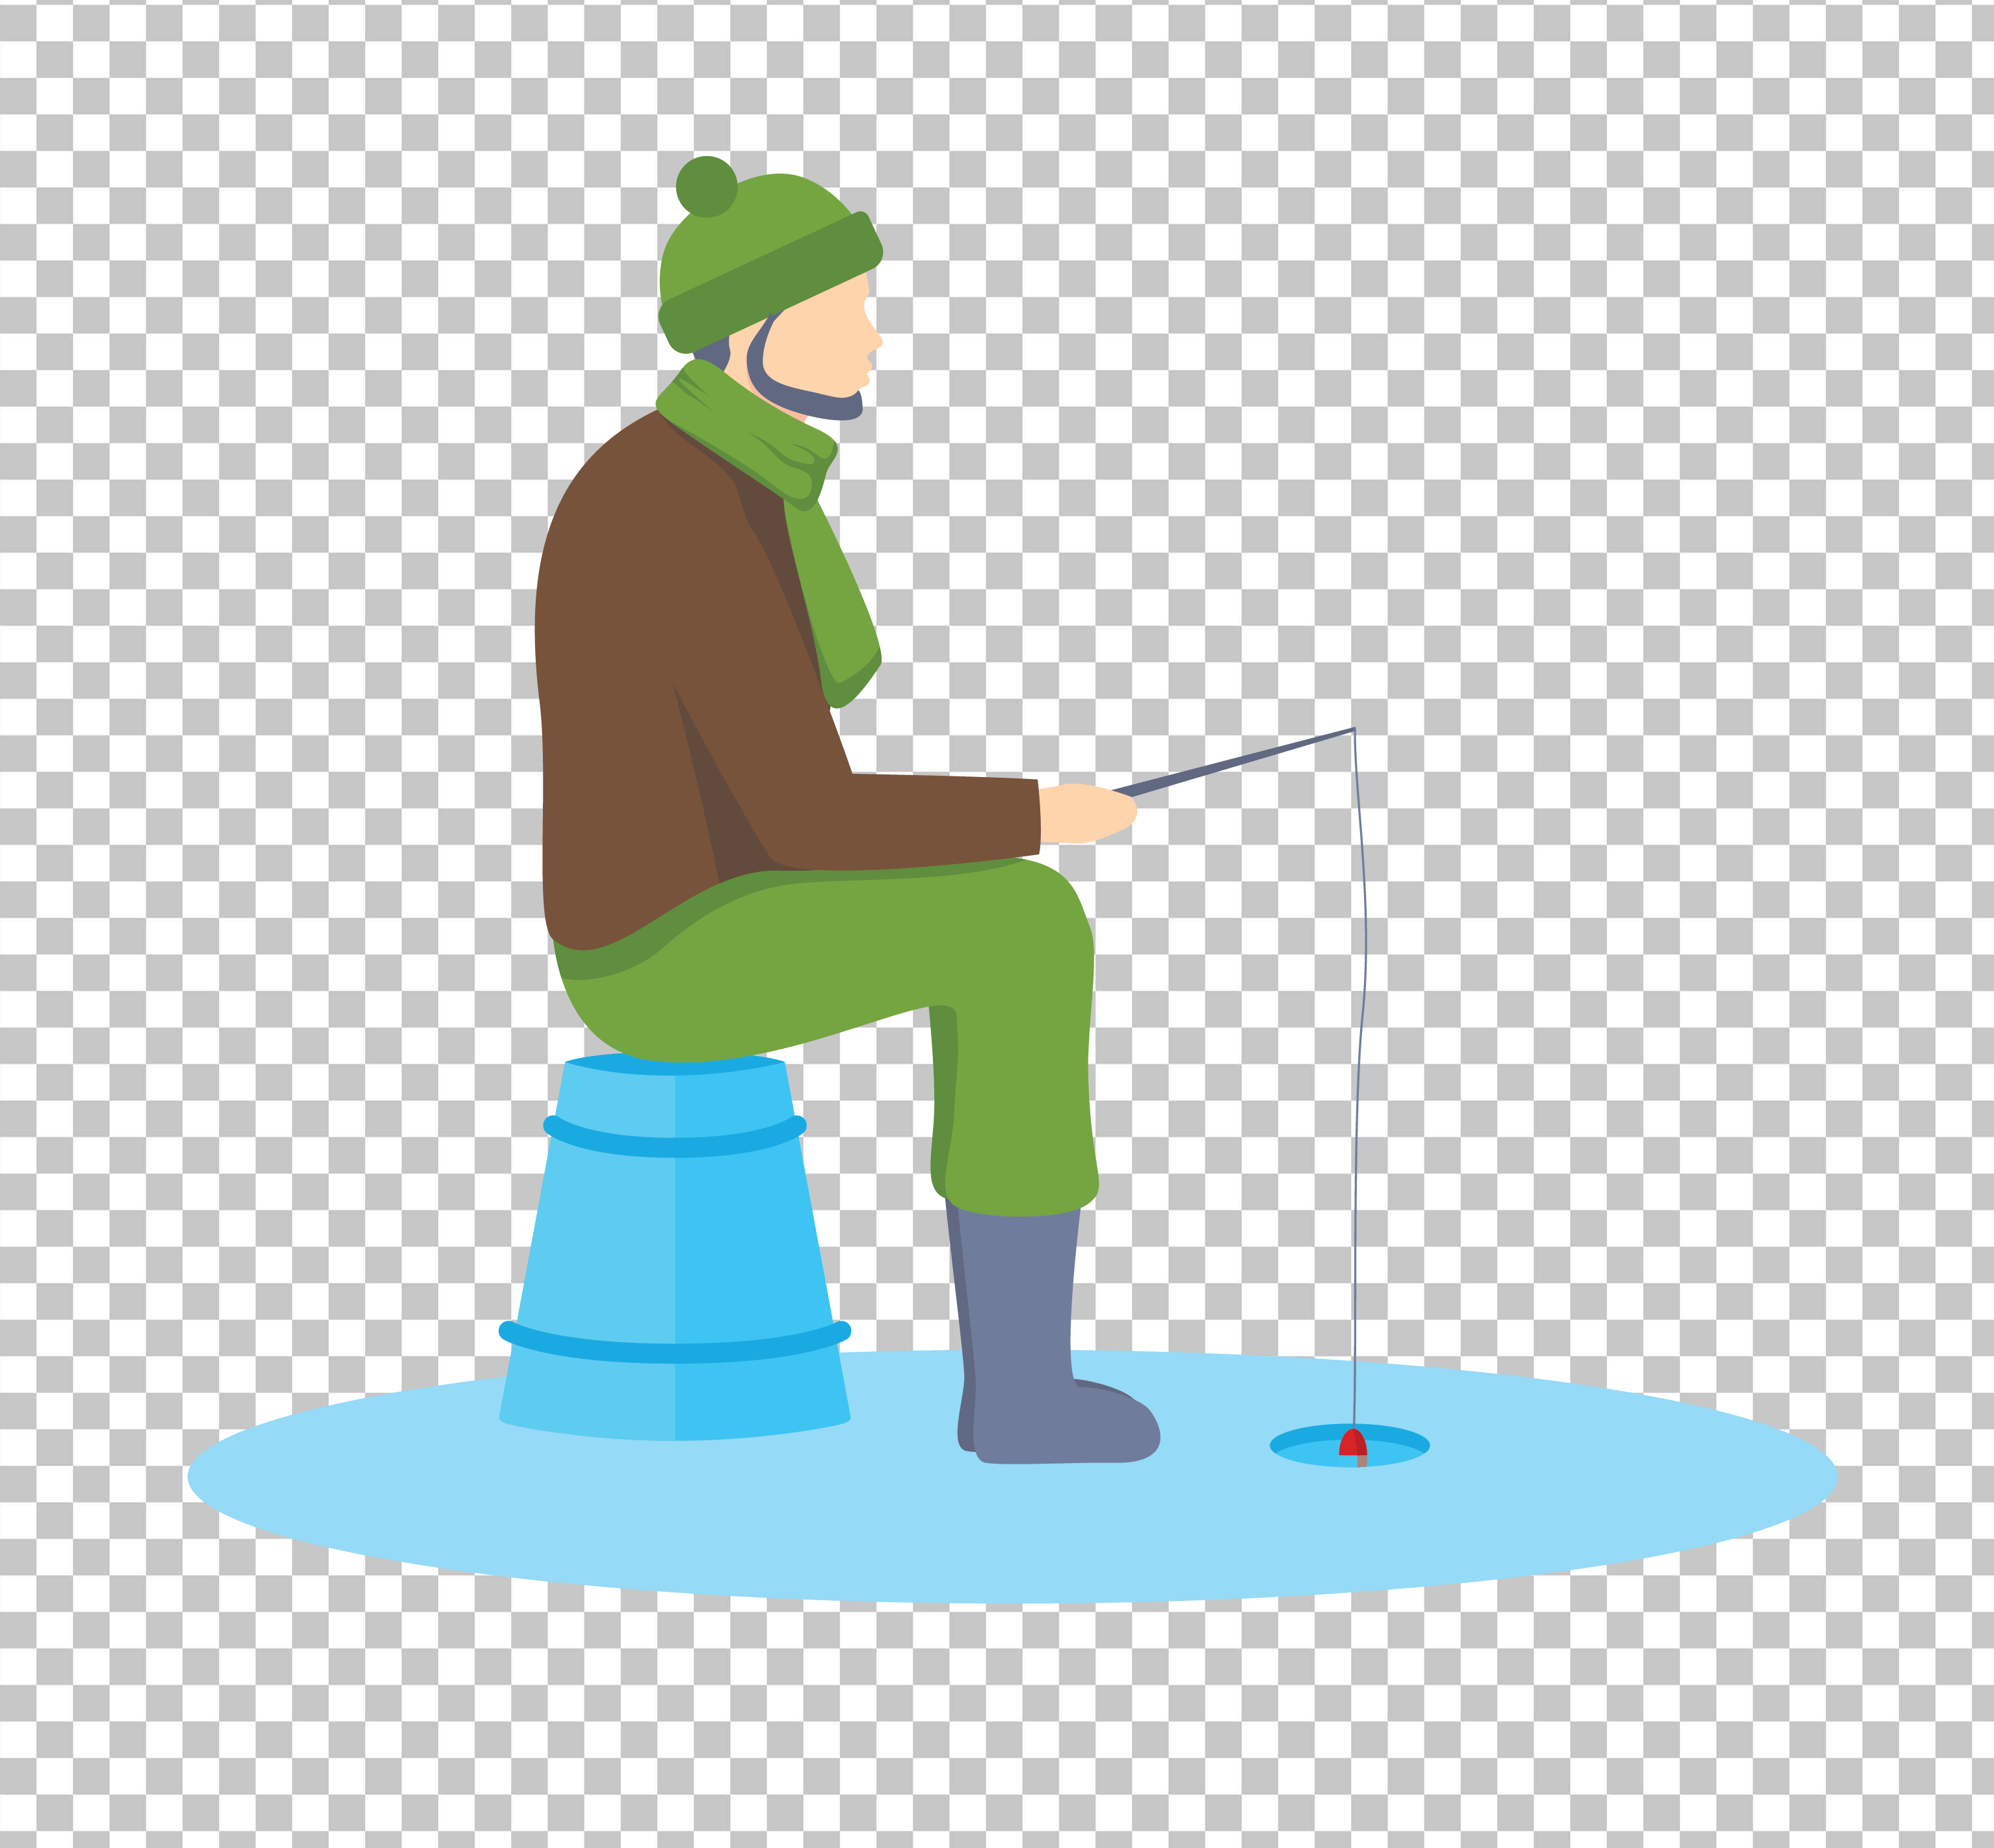 Cartoon of a man sitting on a bucket with a fishing rod.